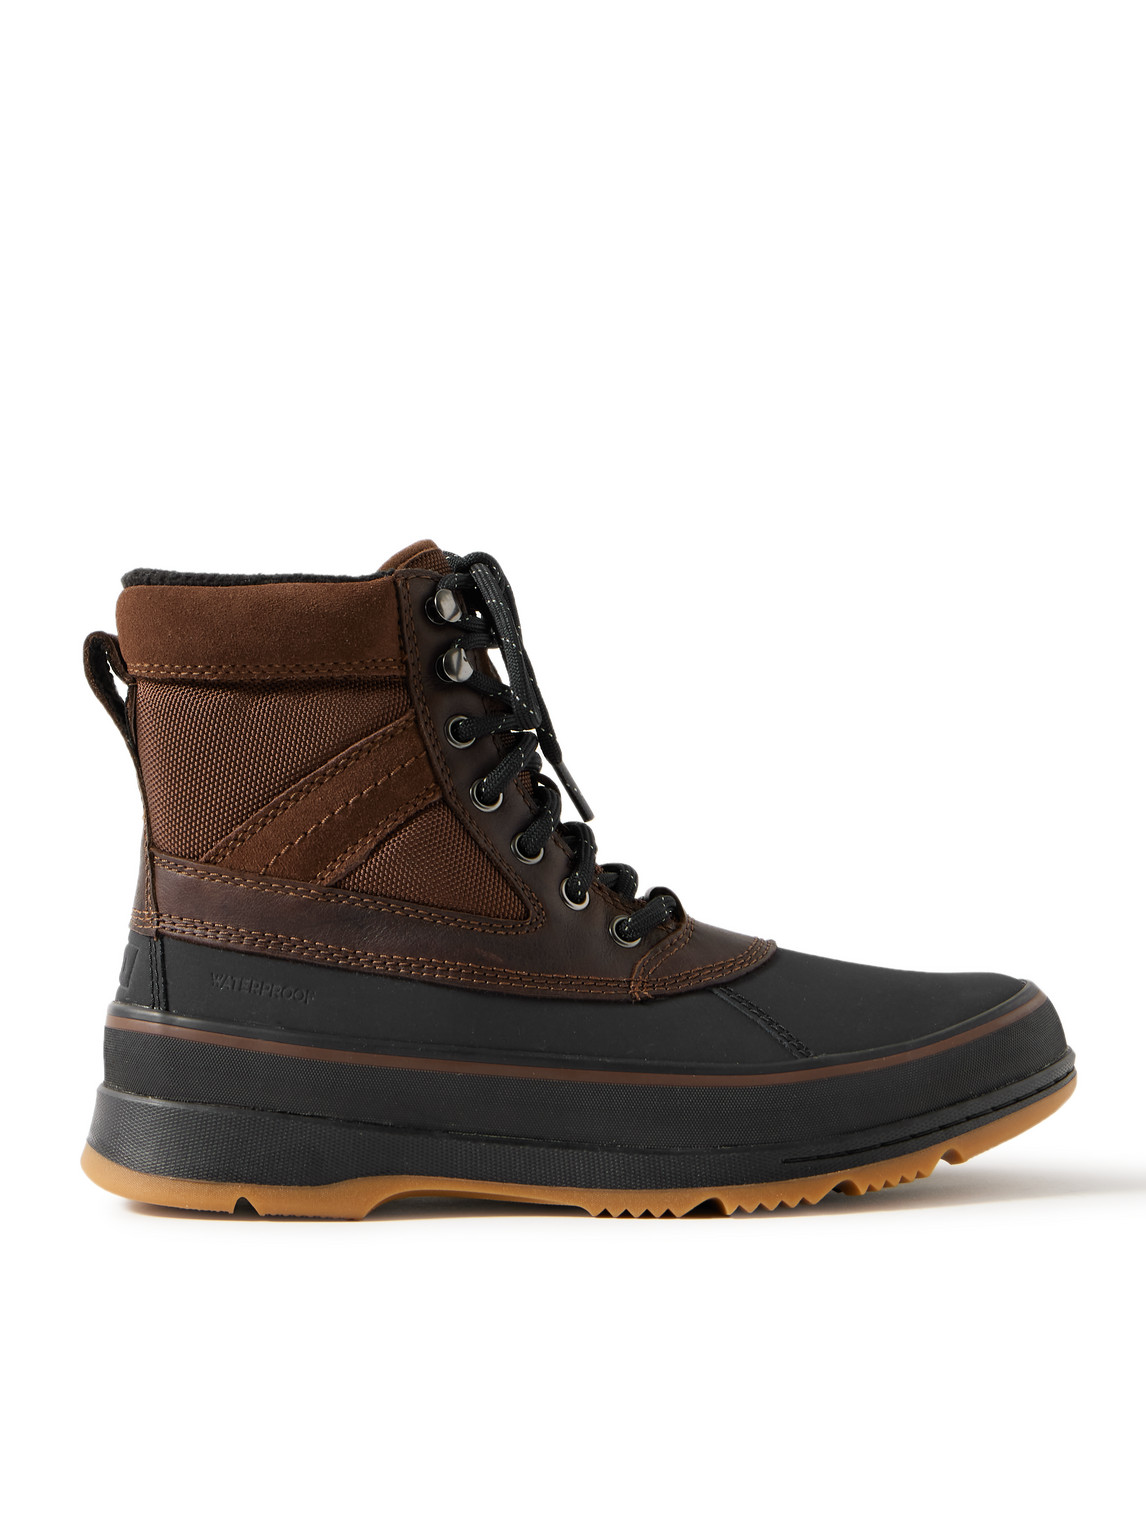 Sorel - Ankeny™ II Leather- and Suede-Trimmed Nylon and Rubber Boots - Men - Brown - US 12 von Sorel